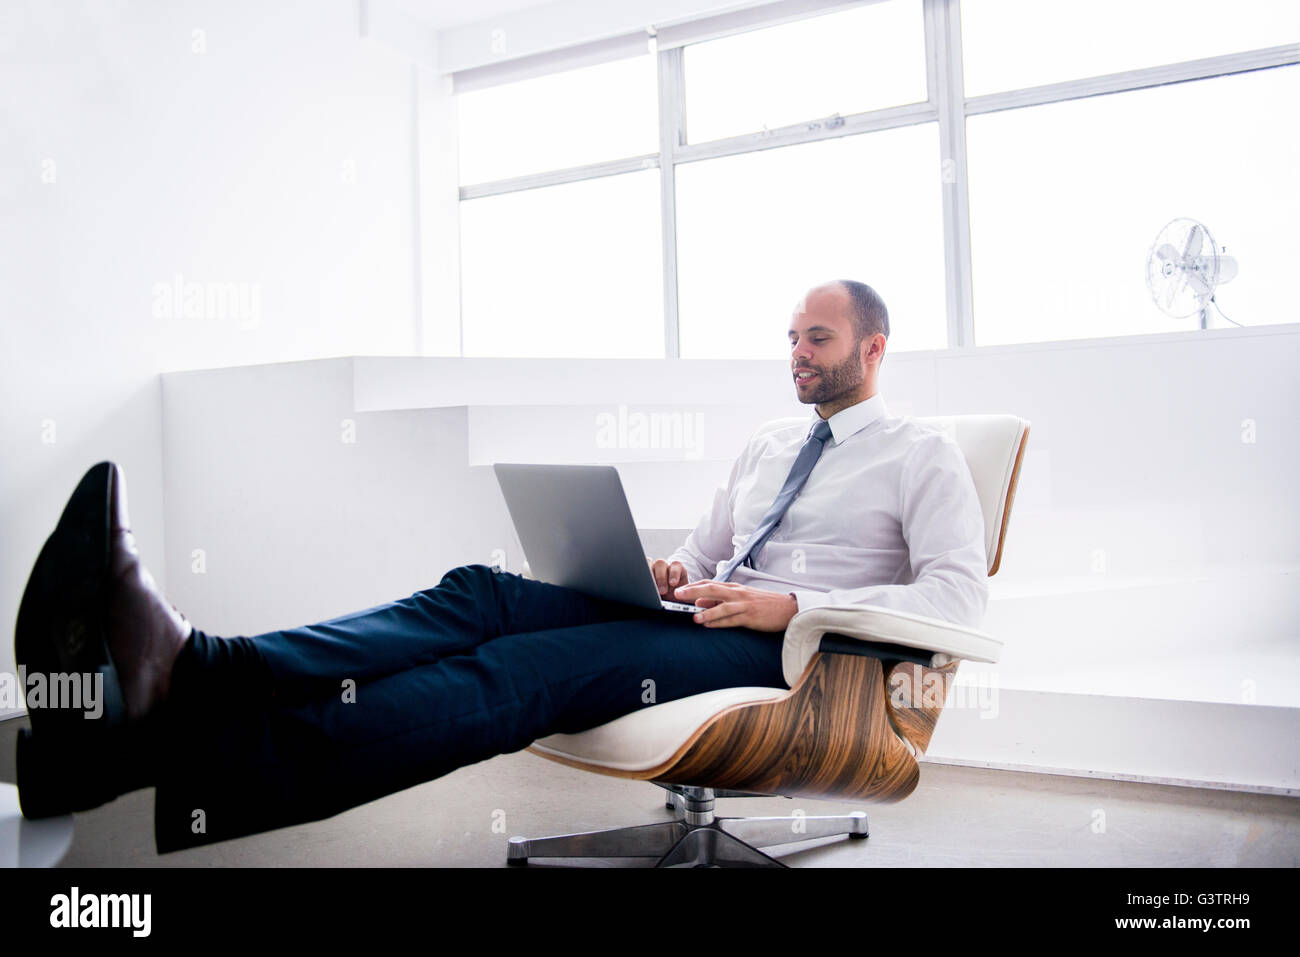 A professional man sitting making notes on a laptop in a business environment. Stock Photo